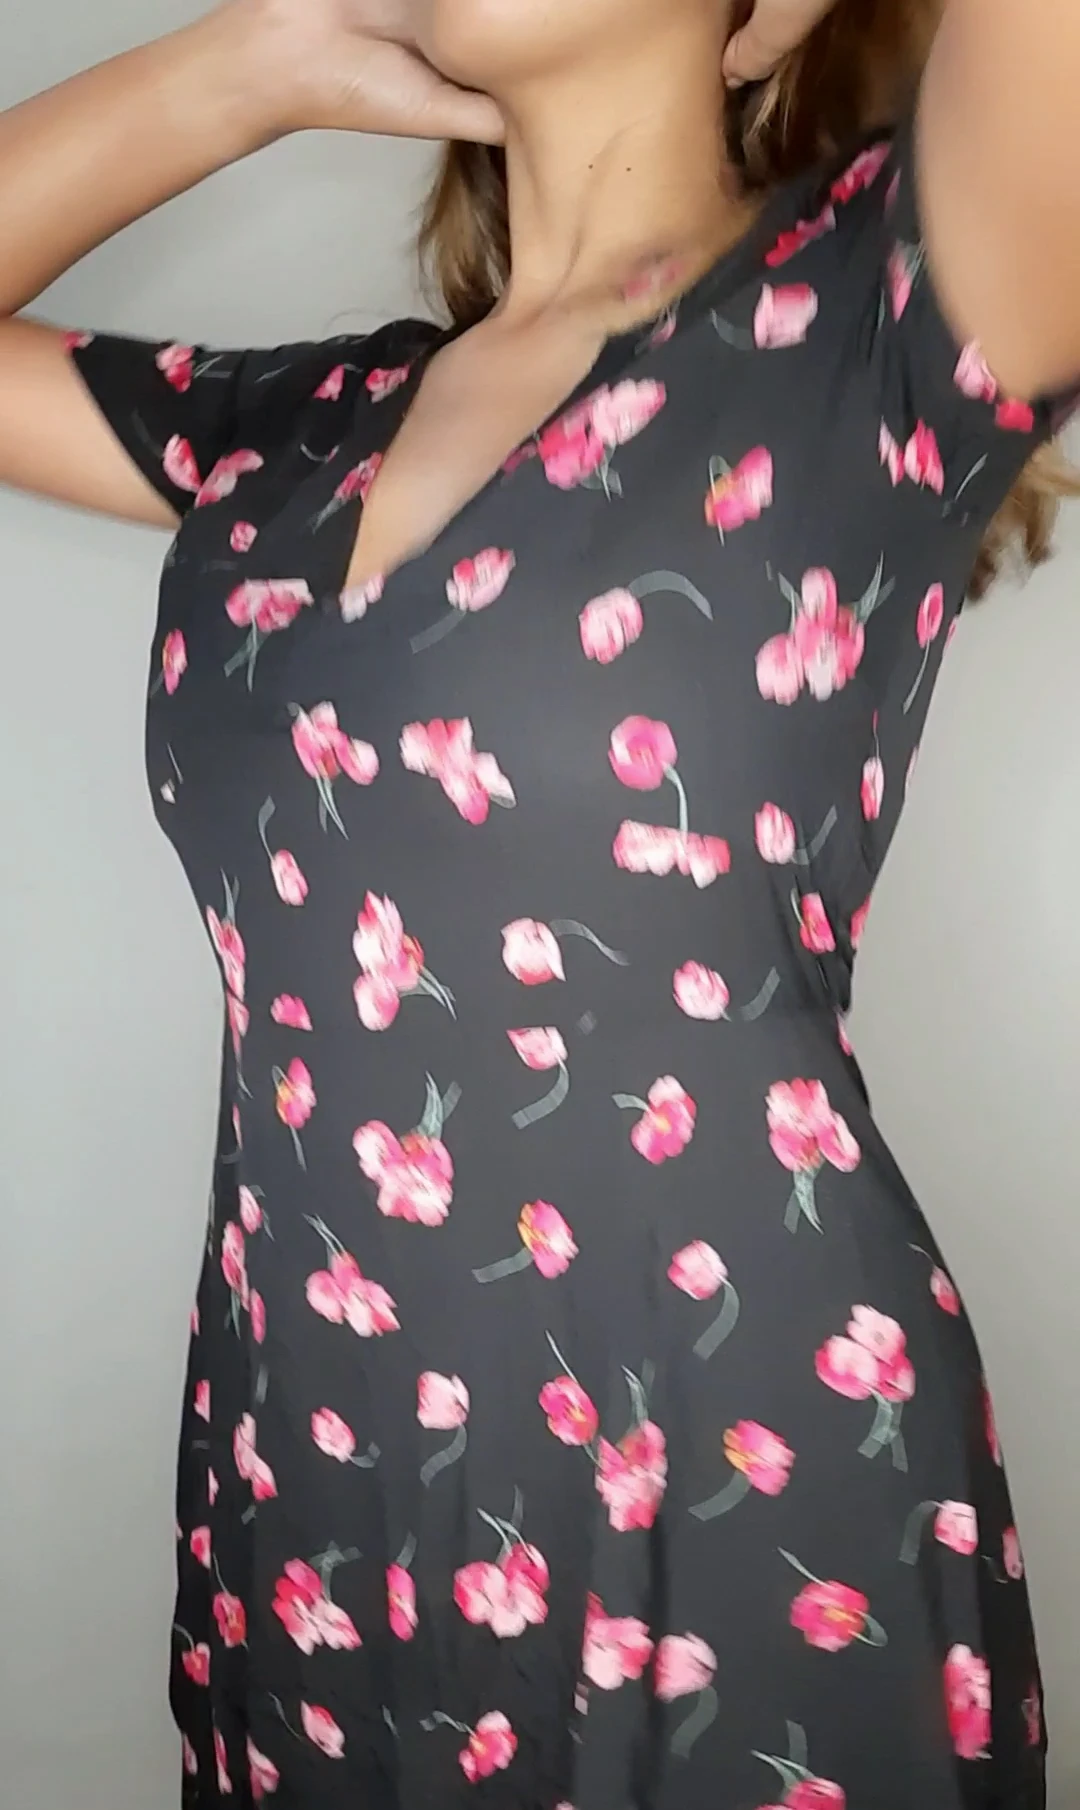 Let's free the twins from the grasp of my flowery dress 🤪 [OC]